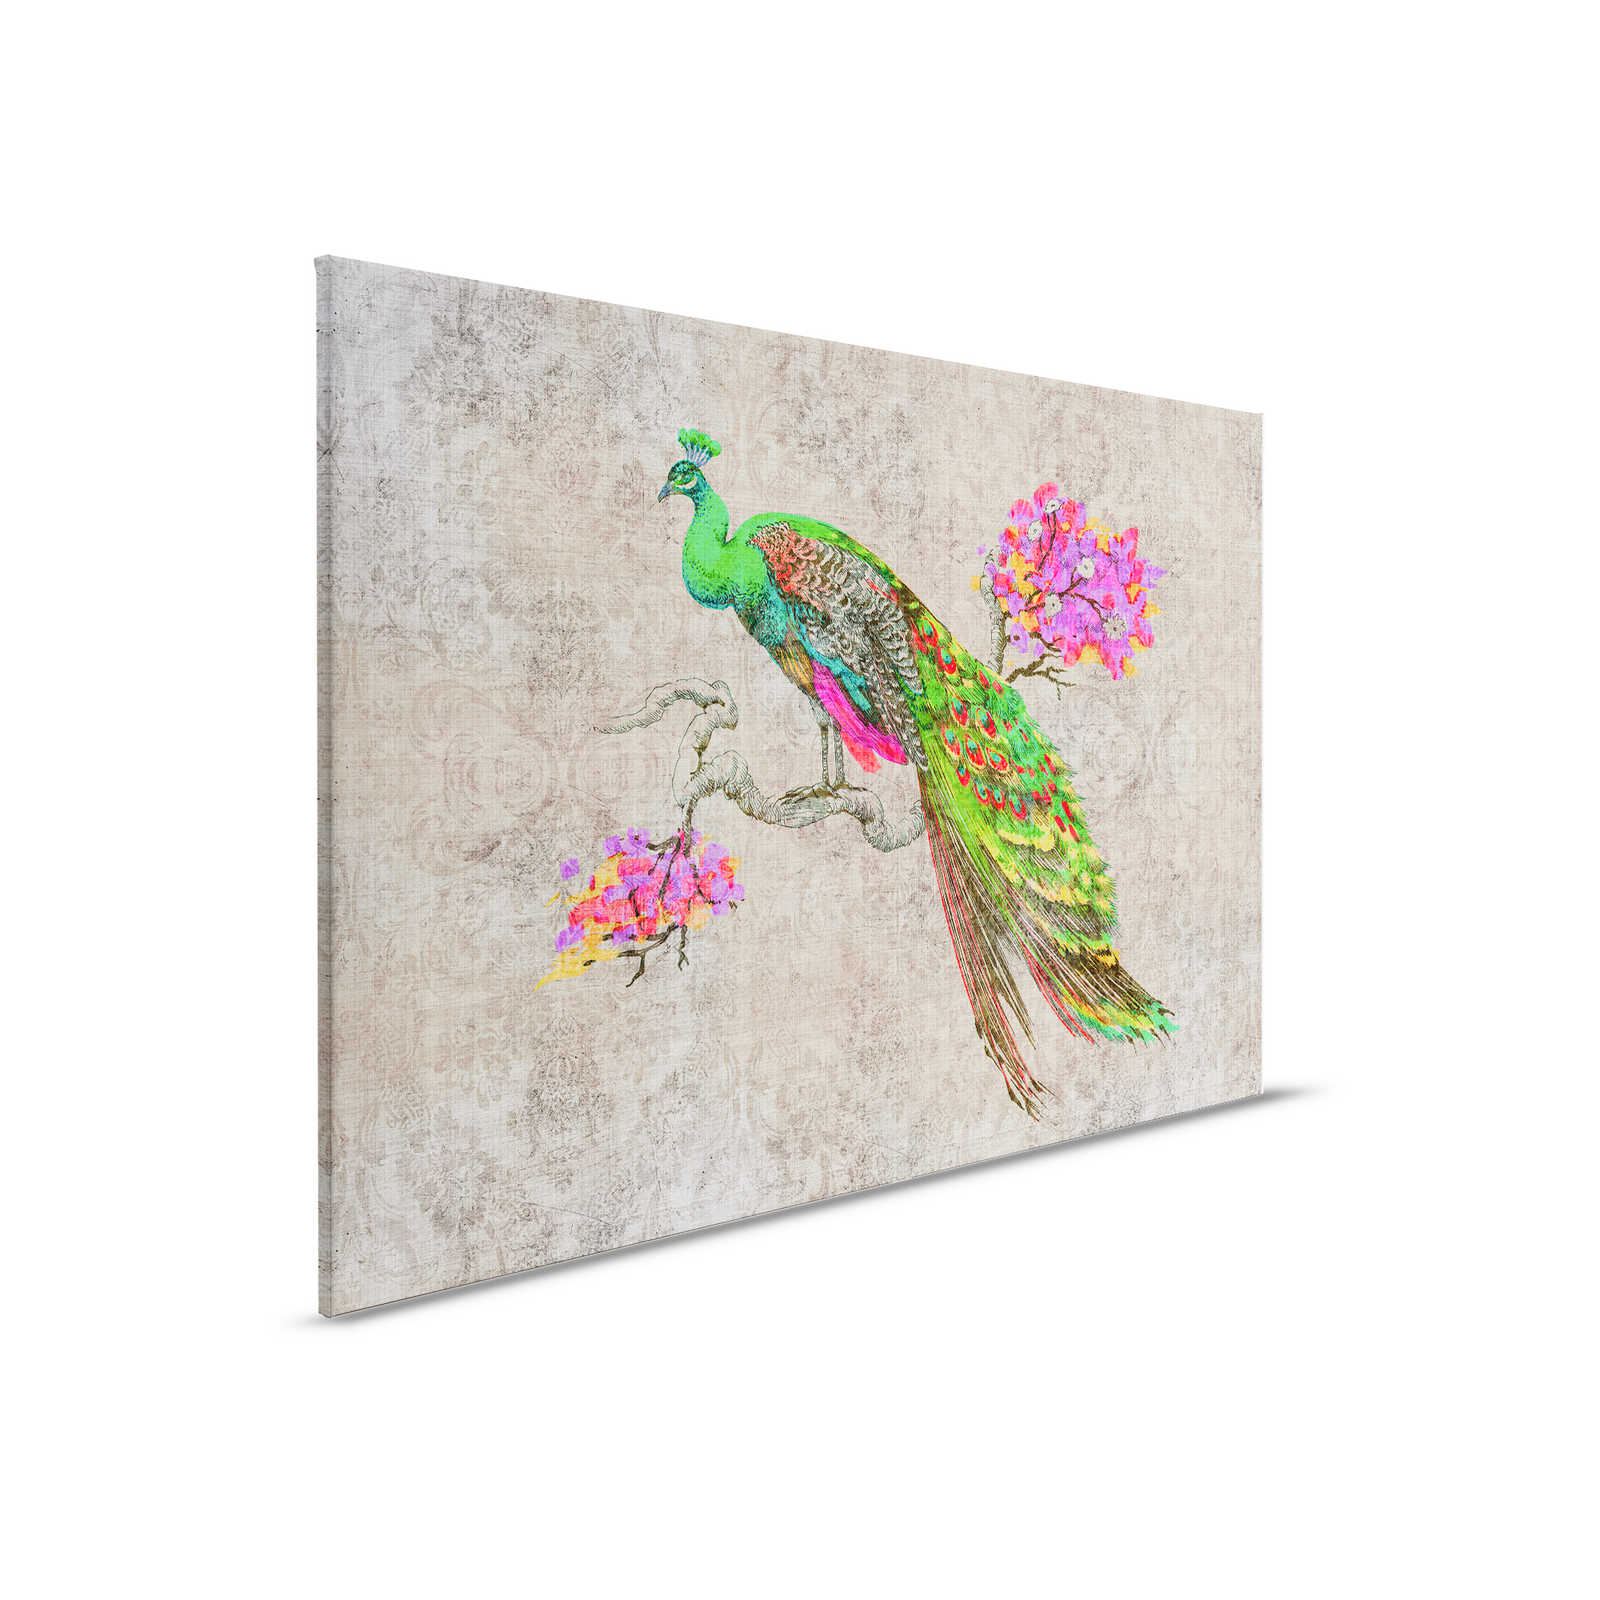 Peacock 1 - Canvas painting in natural linen structure with peacock in neon colours - 0.90 m x 0.60 m
